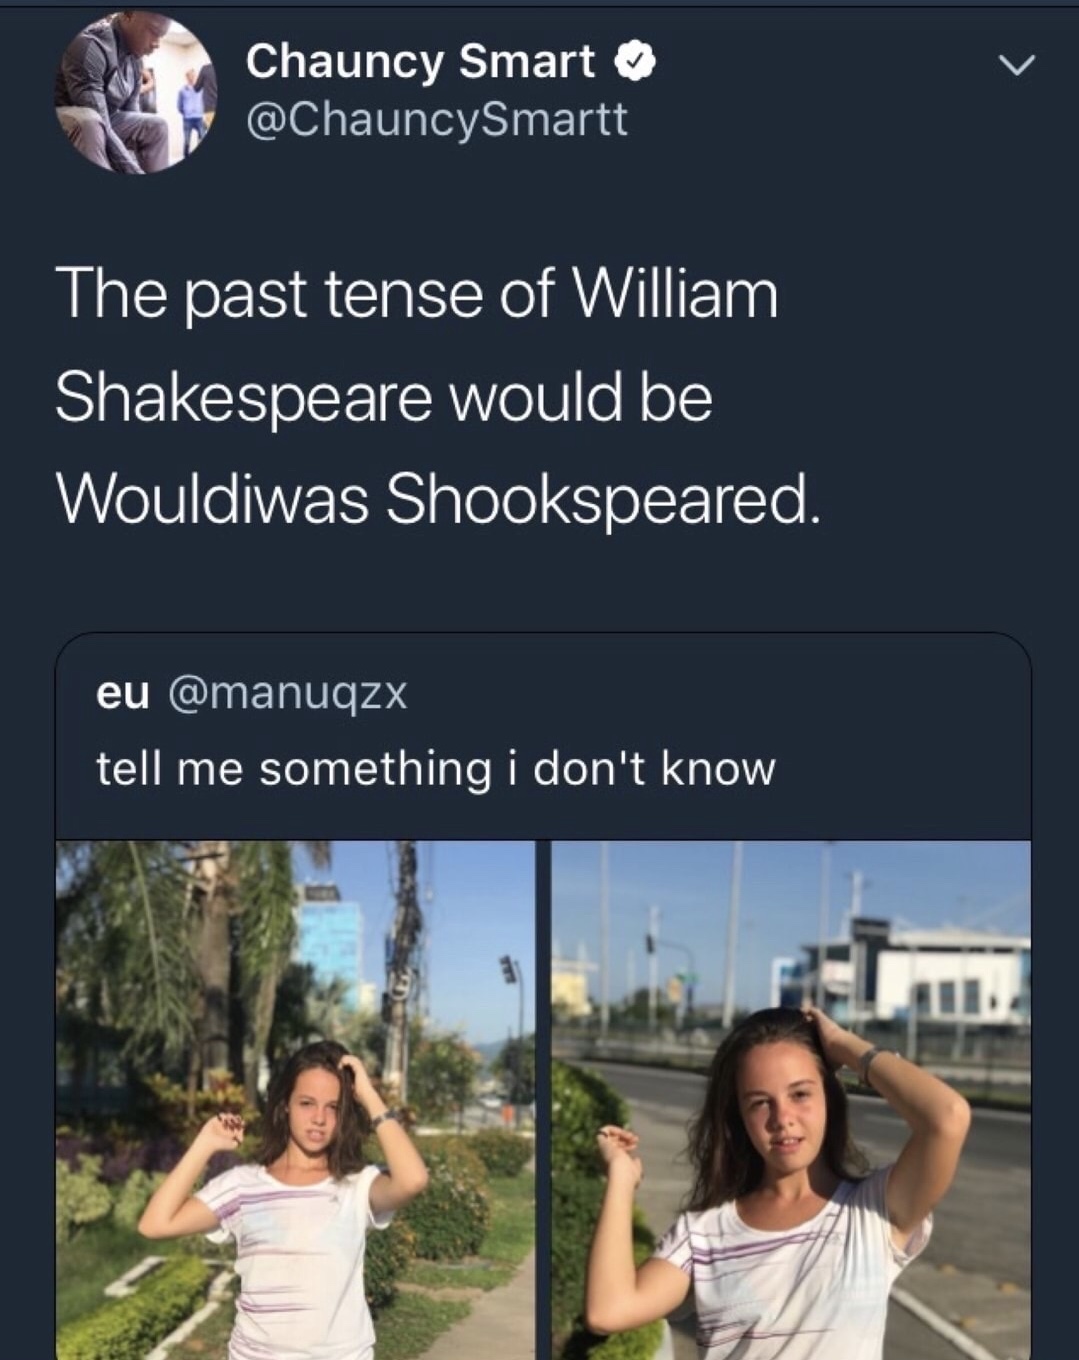 memes tell me something i dont know - Chauncy Smart The past tense of William Shakespeare would be Wouldiwas Shookspeared. eu tell me something i don't know